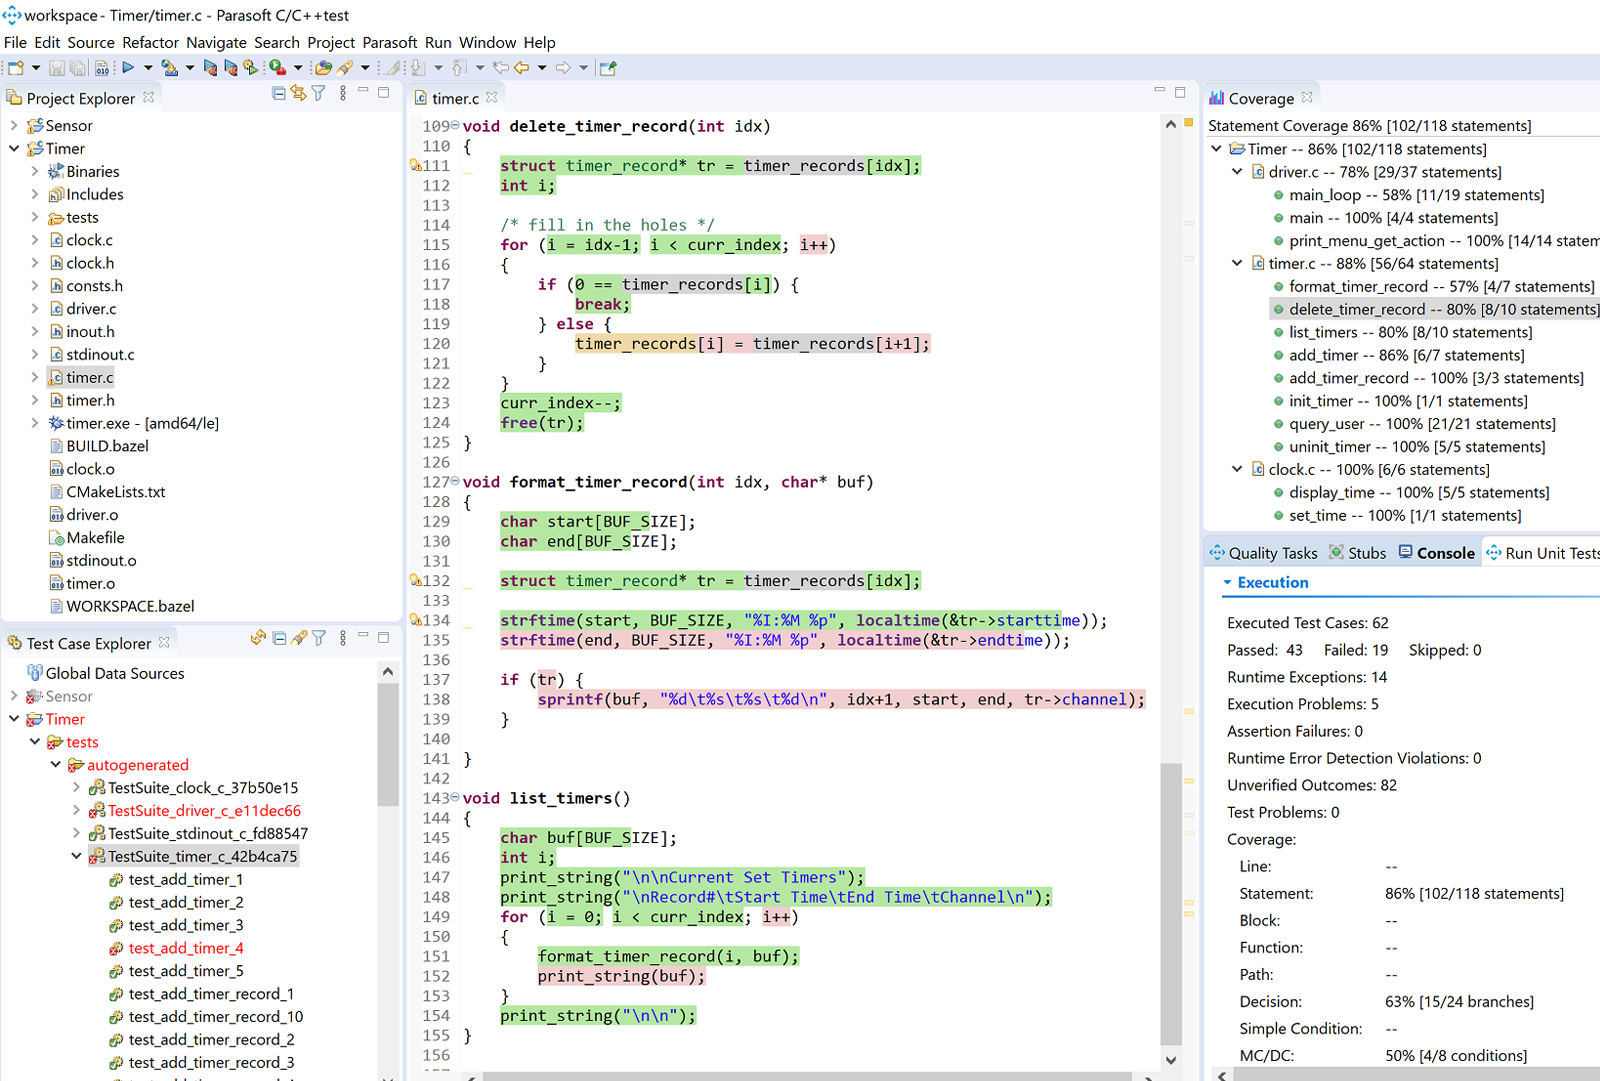 Screenshot of C/C++test with code highlighted in green, red, or yellow to indicate test coverage.